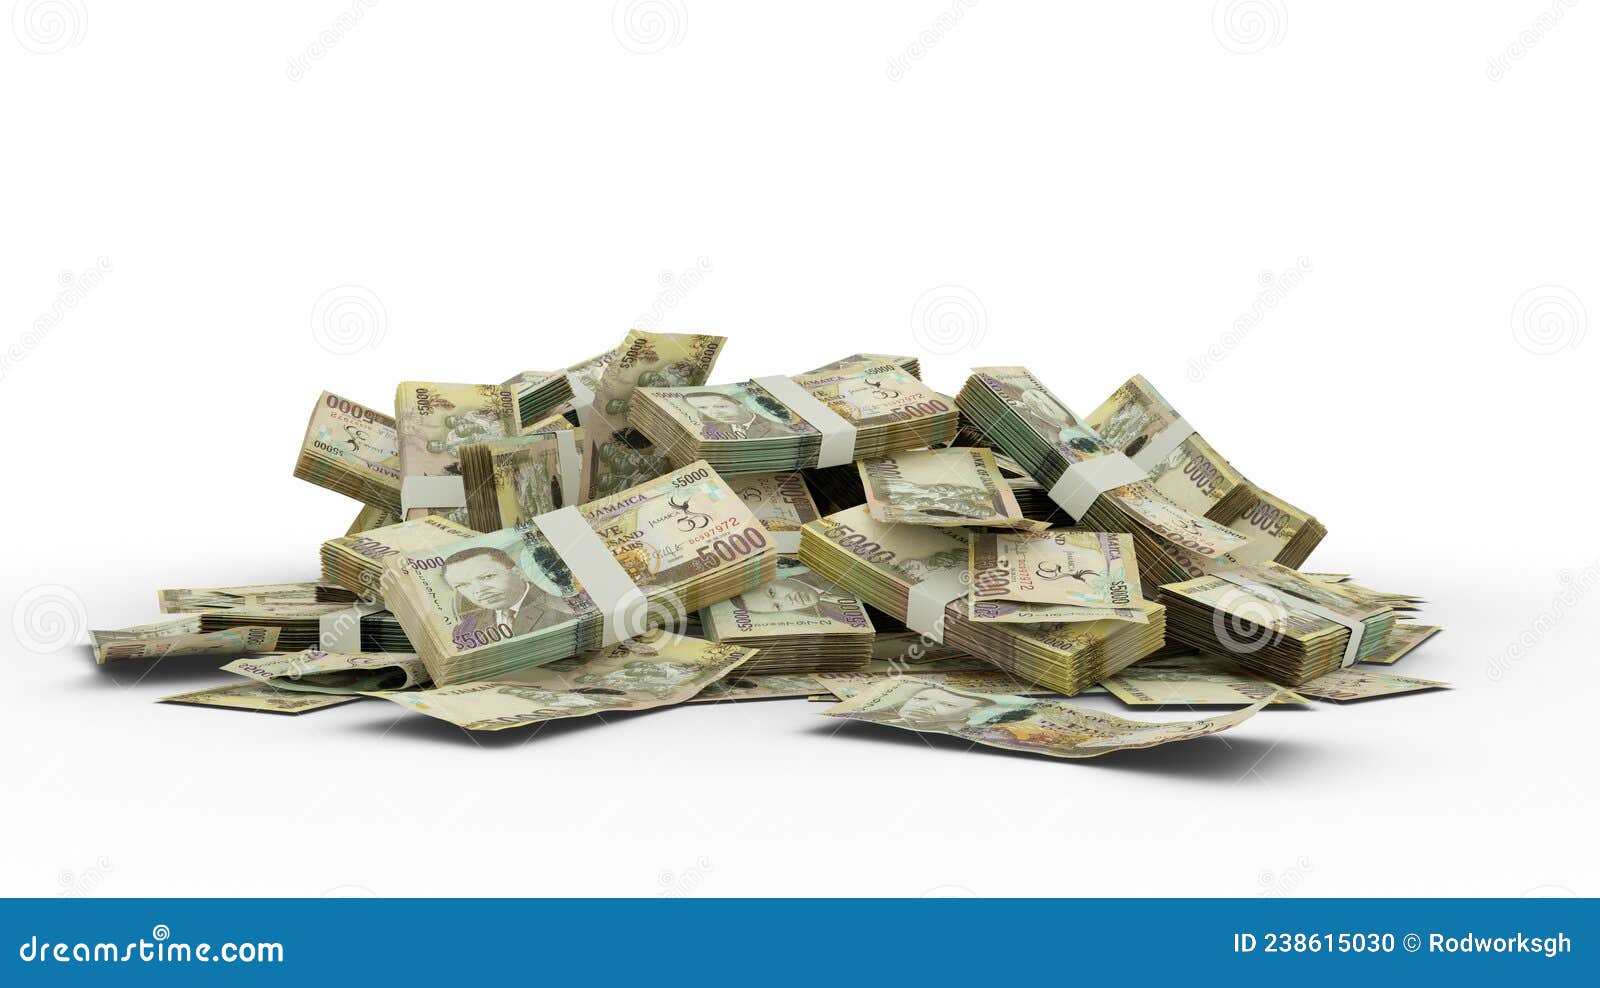 stack of 5000 jamaican dollar notes  on white background